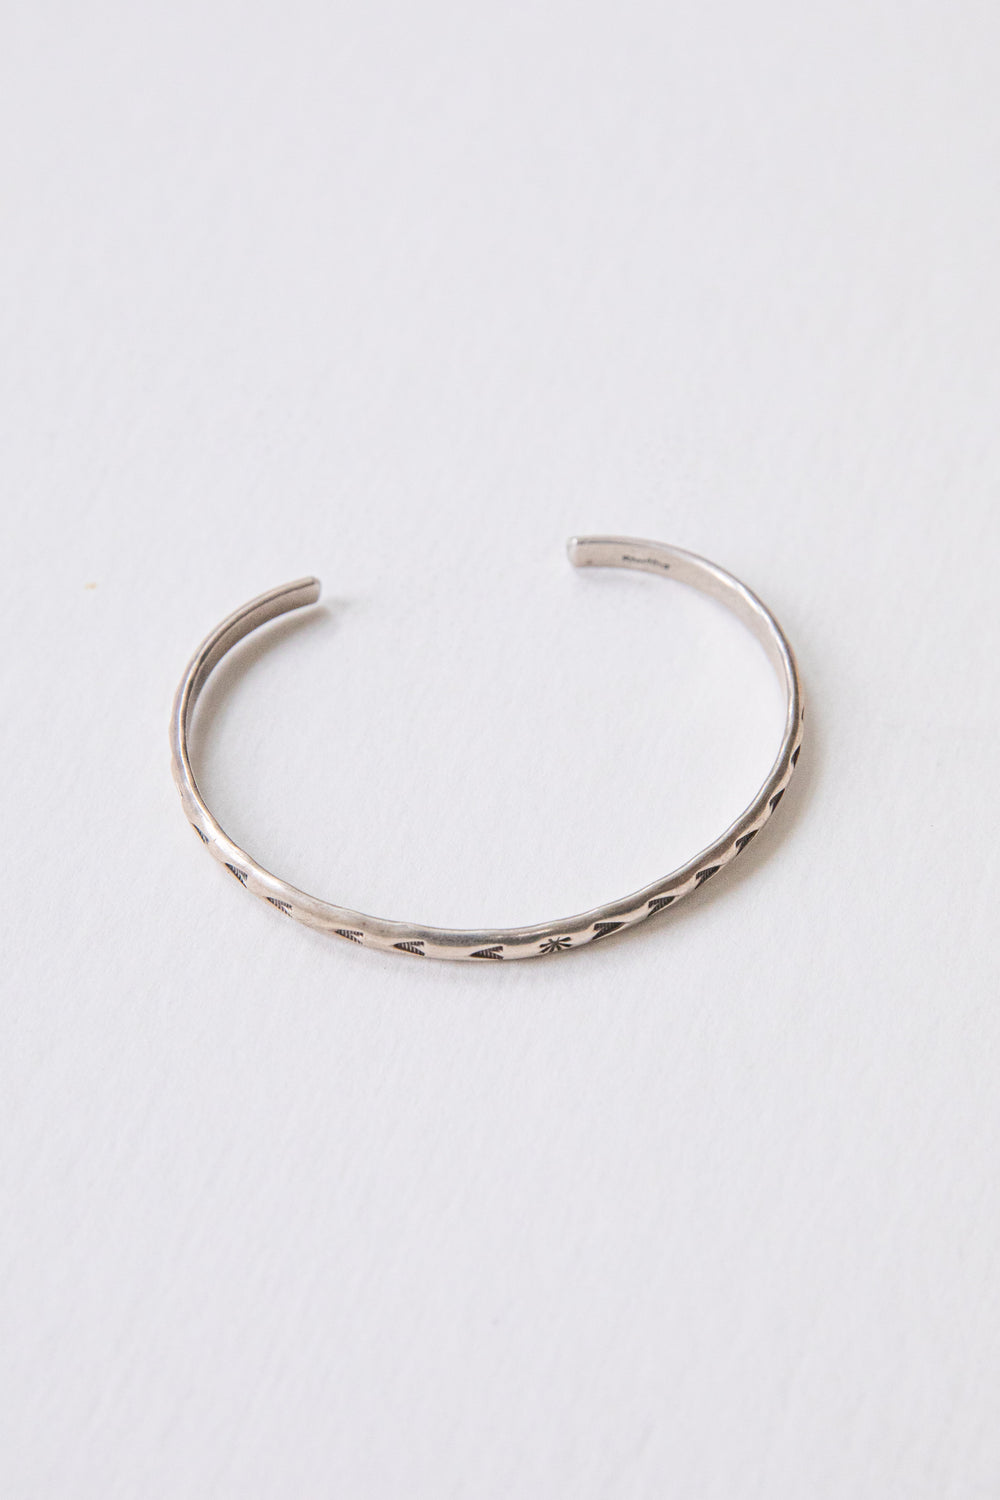 Stamped Arrow Sterling Cuff